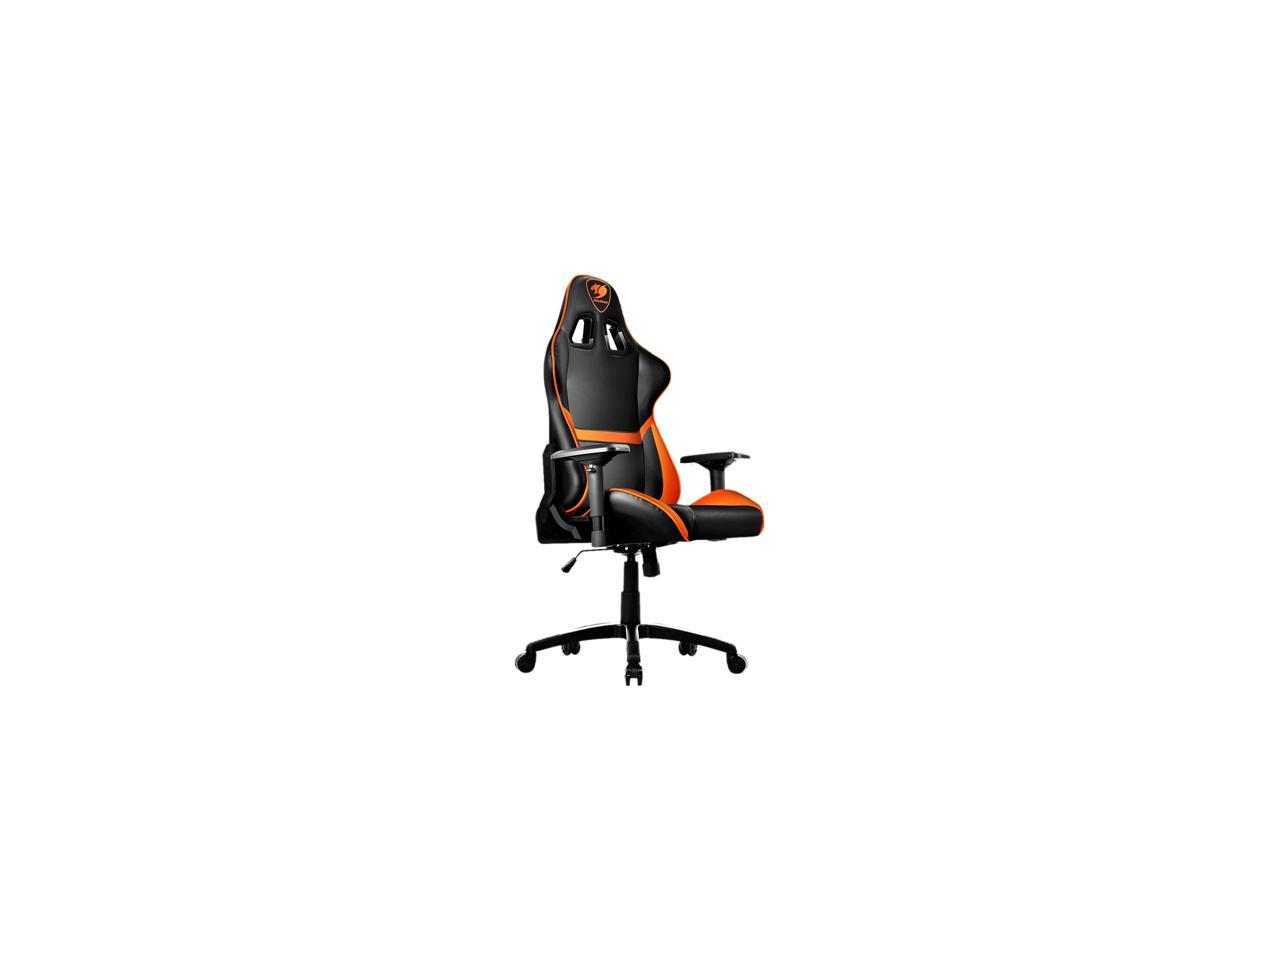 Cougar Armor (Orange) Gaming Chair with Breathable Premium PVC Leather and Body-embracing High Back Design